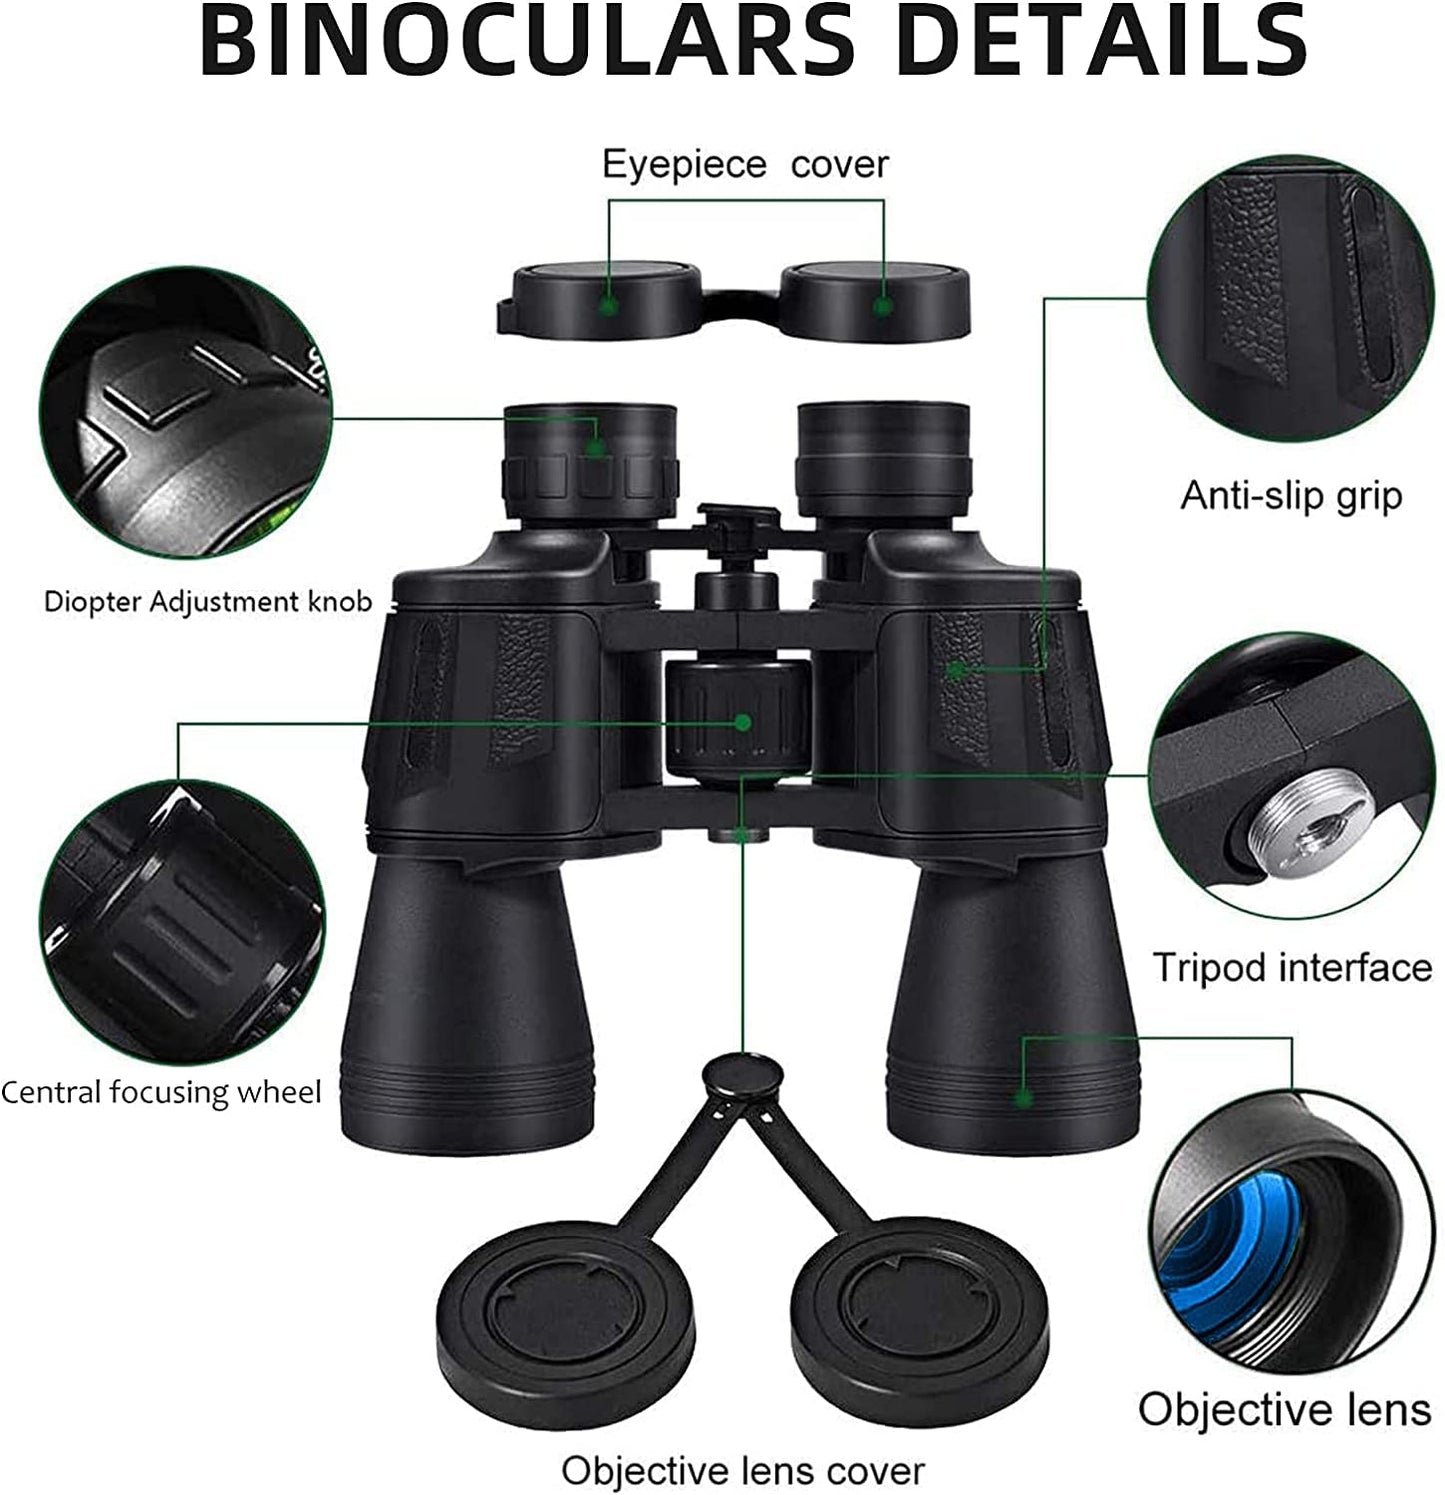 TDOO 20x50 Binoculars for Adults Professional Powerful Binoculars for Travel Bird Sightseeing Watching Hunting Wildlife Ou r Sports Games and Concerts (BLACK 4)